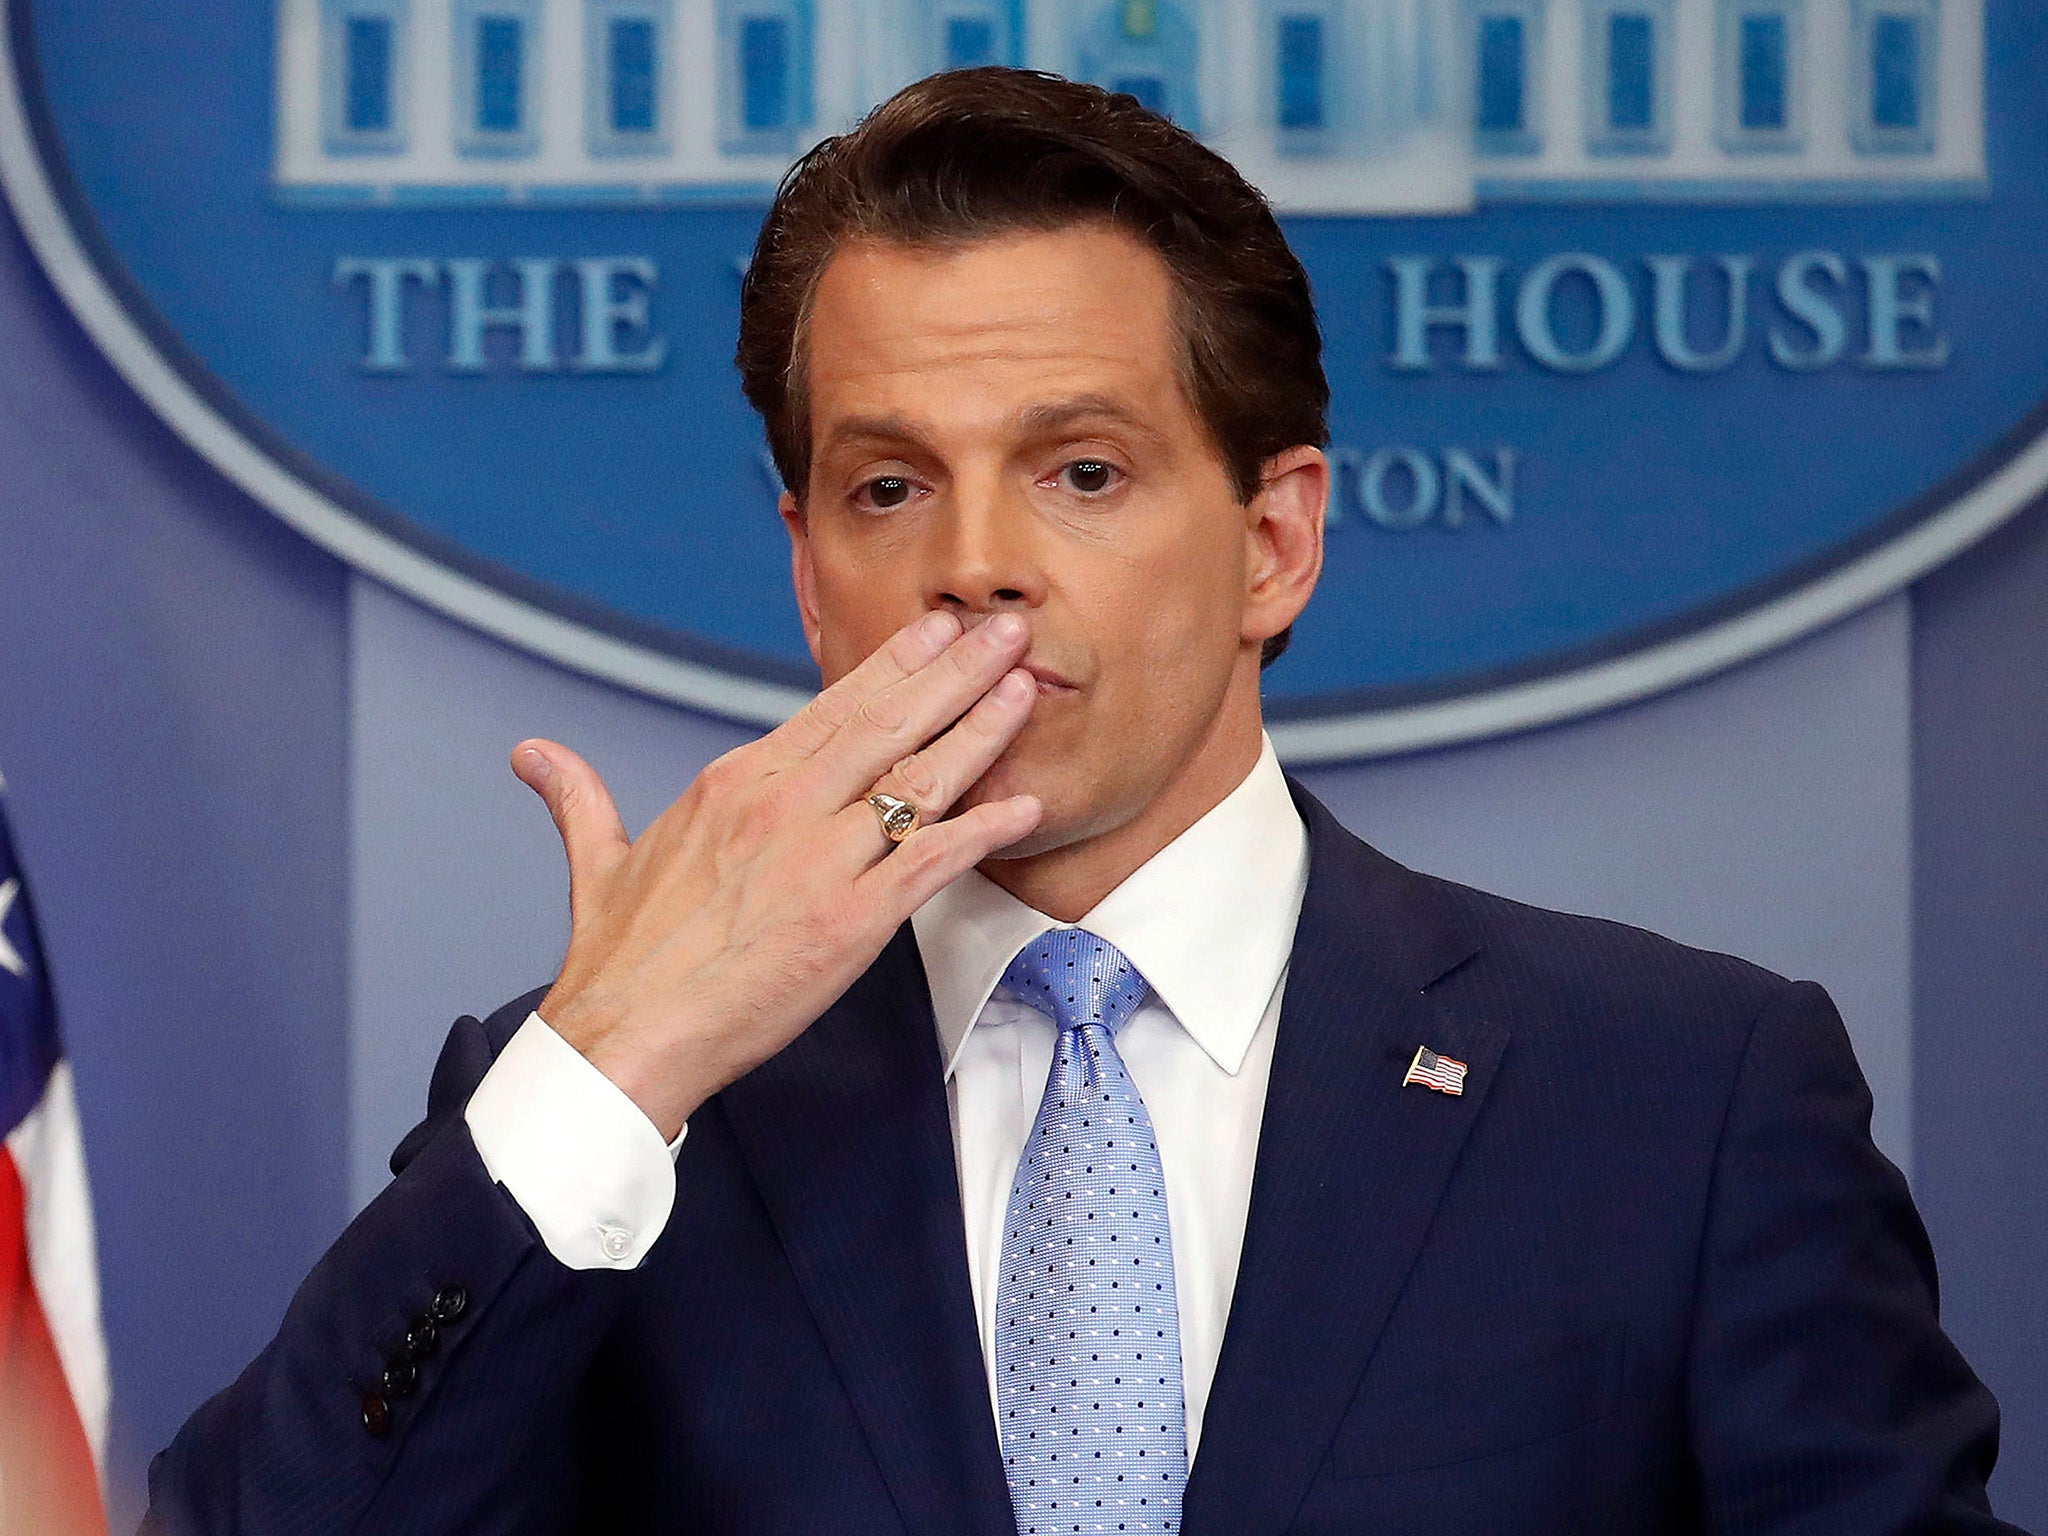 The one and only Anthony Scaramucci